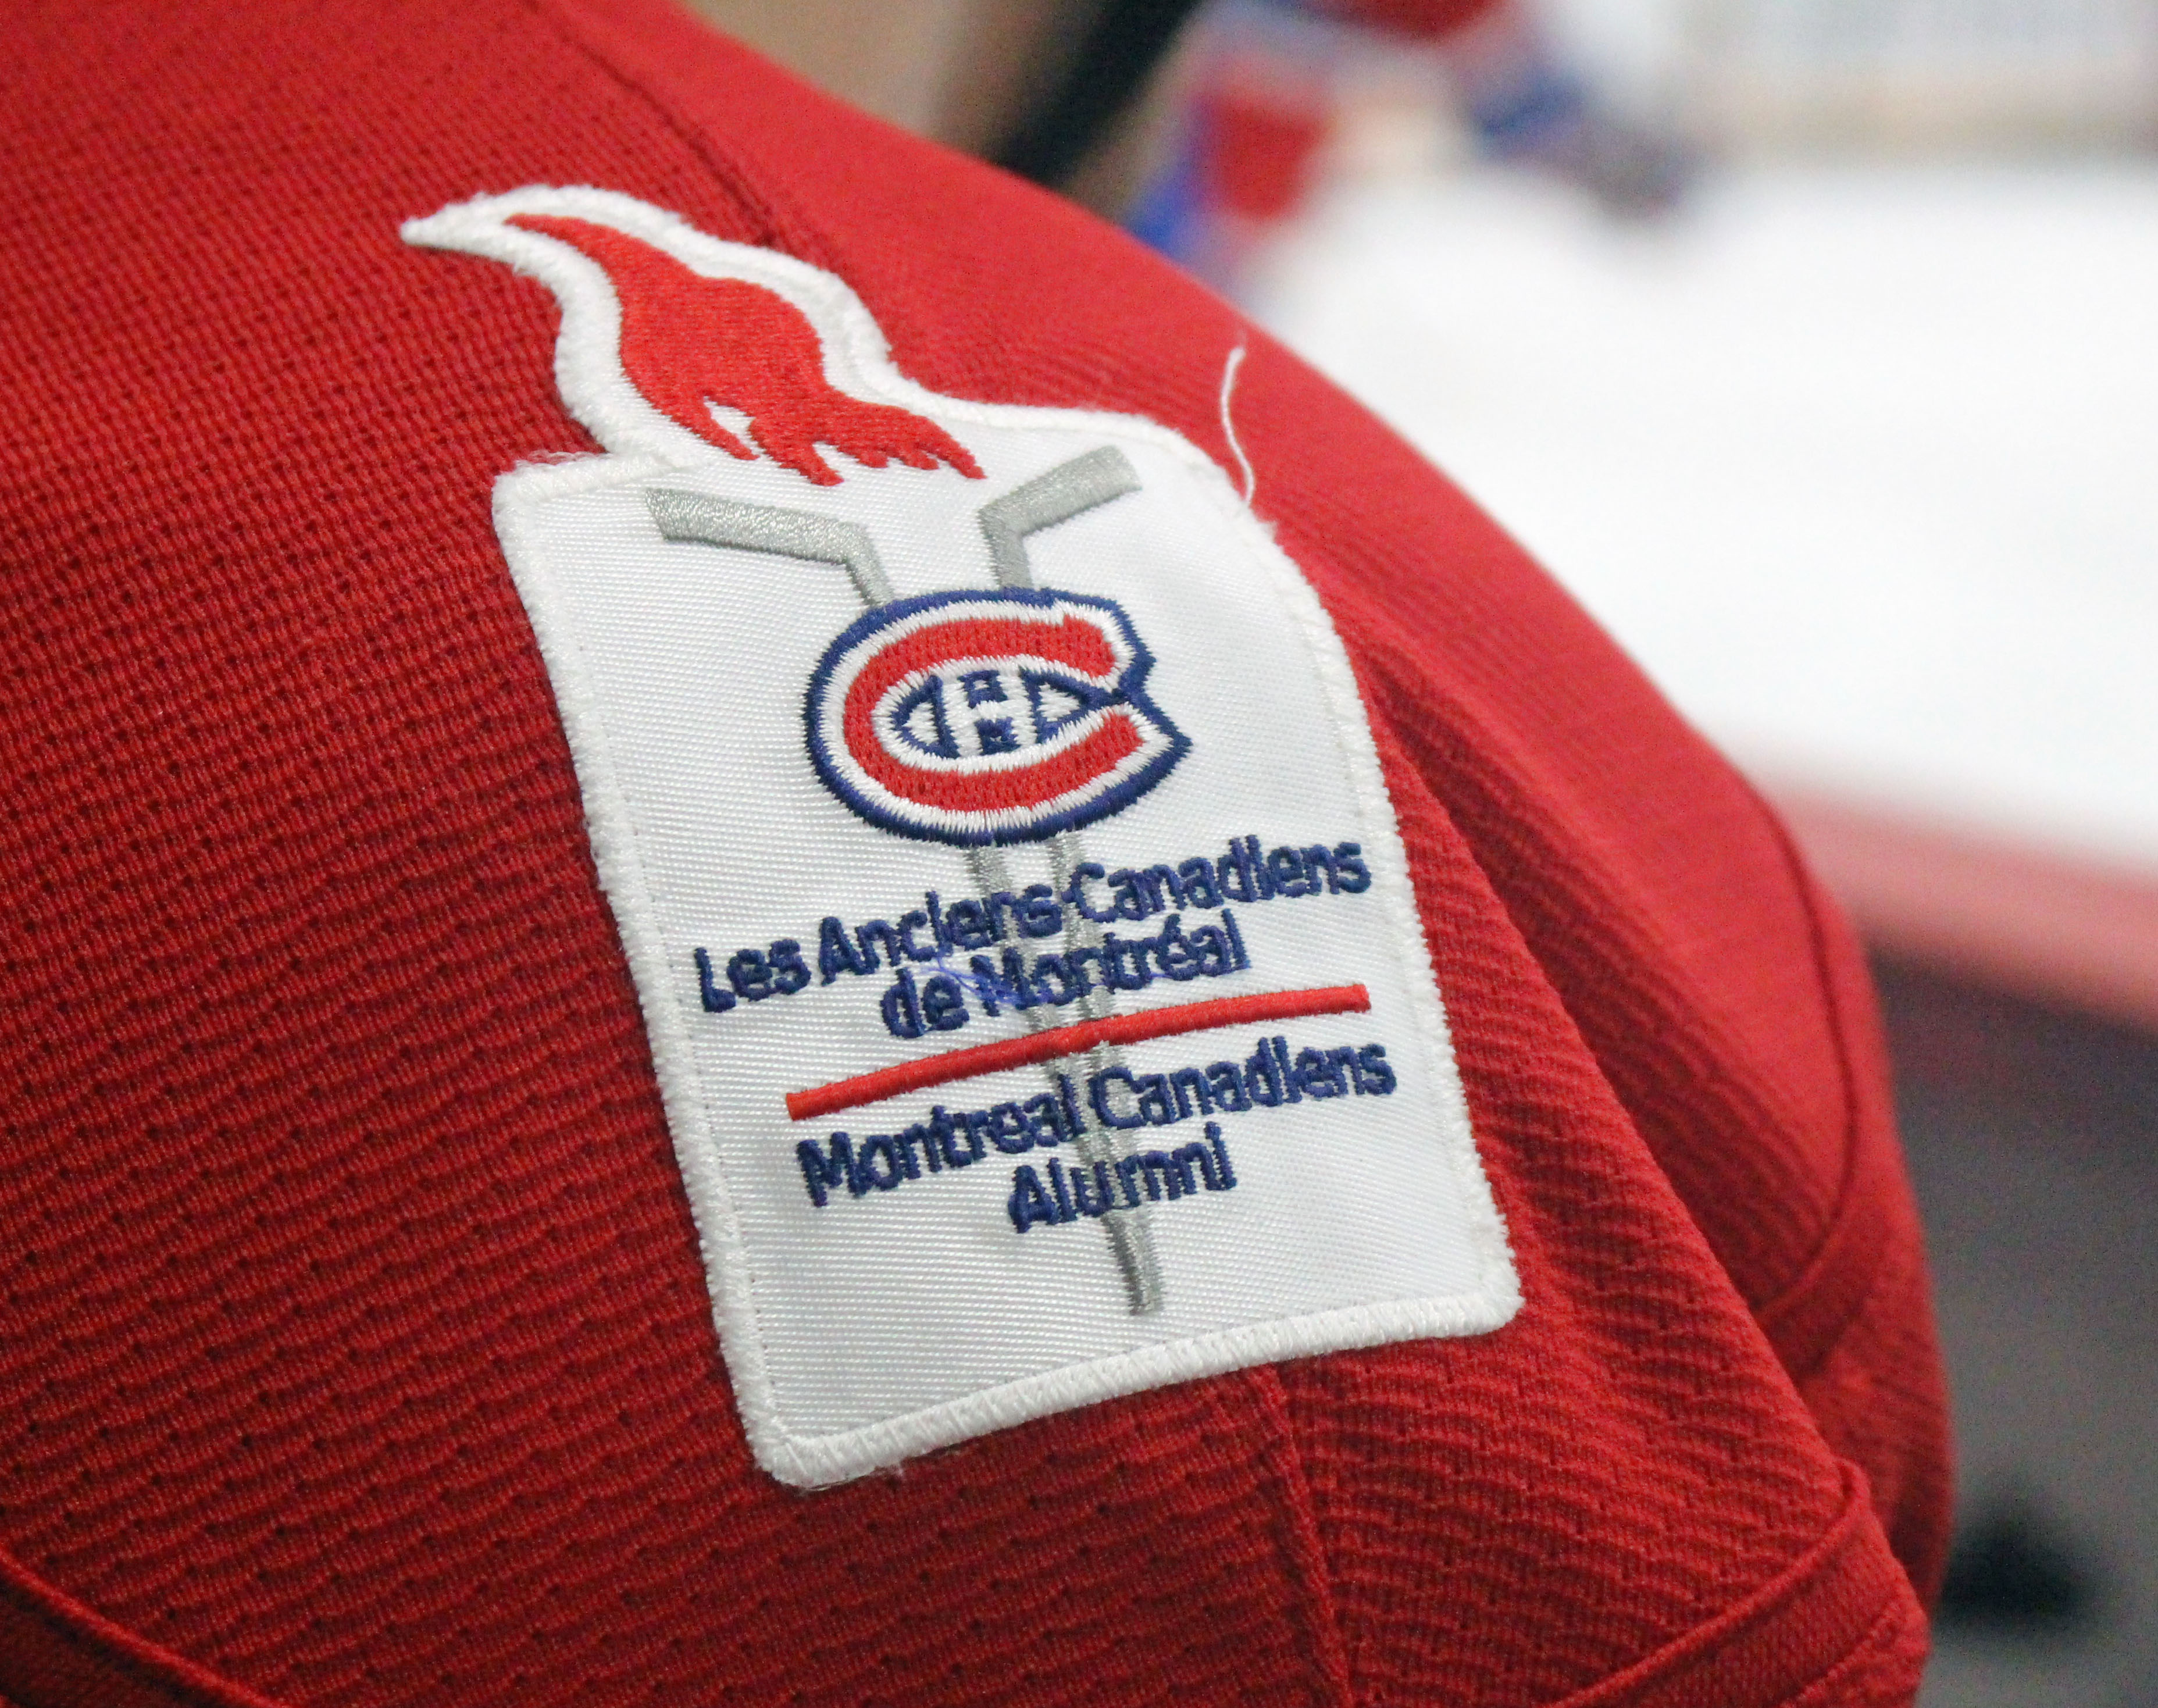 Montreal Canadiens Alumni coming to Palmerston